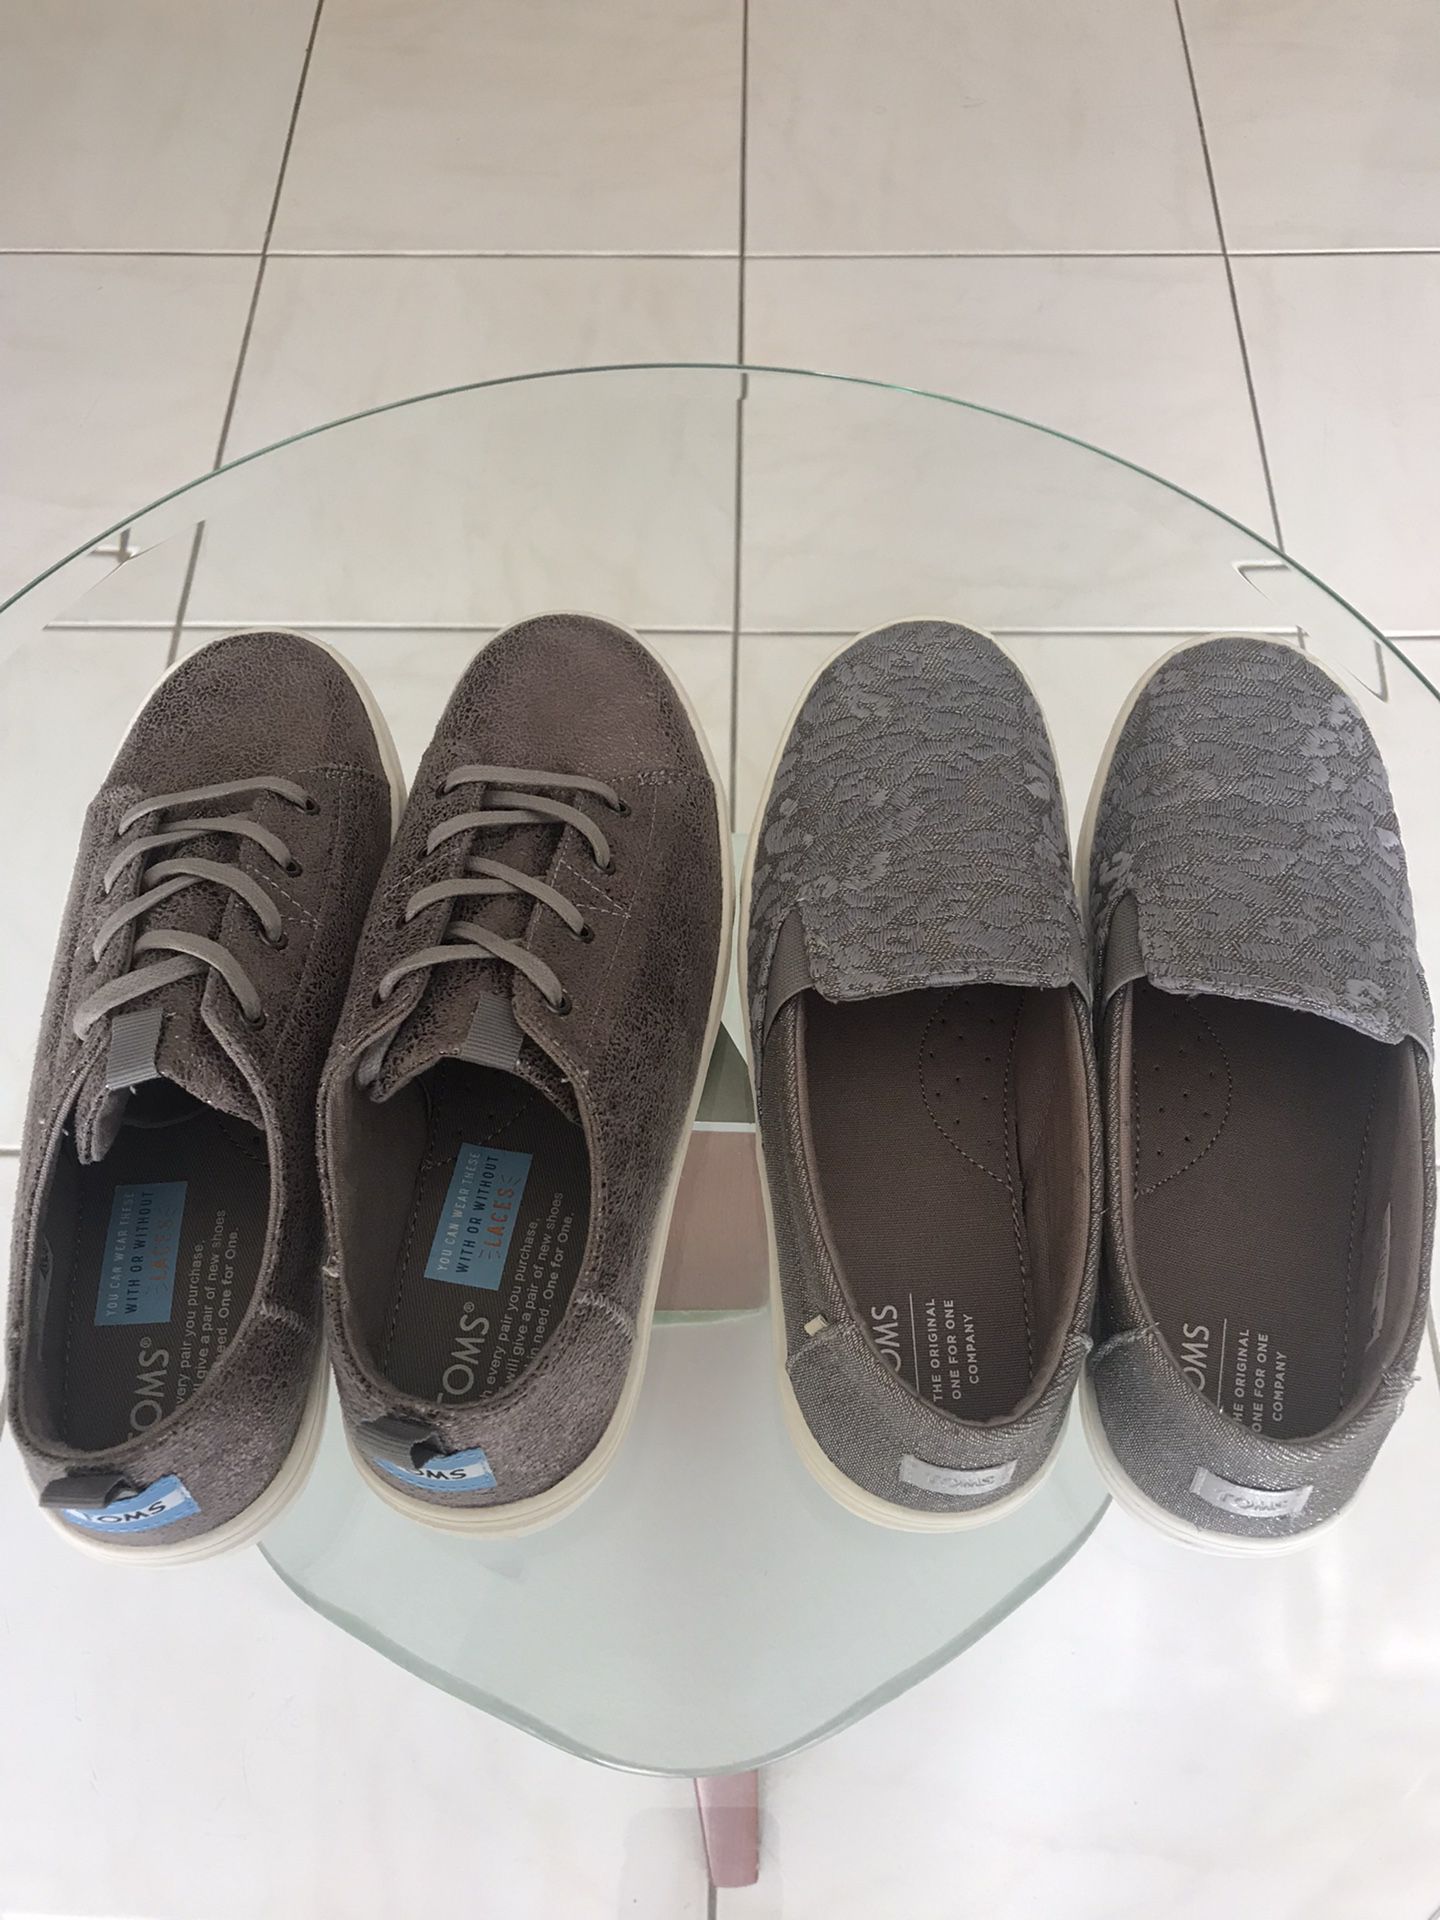 New Famous Designer TOMS Shoes Size 5.5 And 6. Will Feet Size 6 and 7 ...